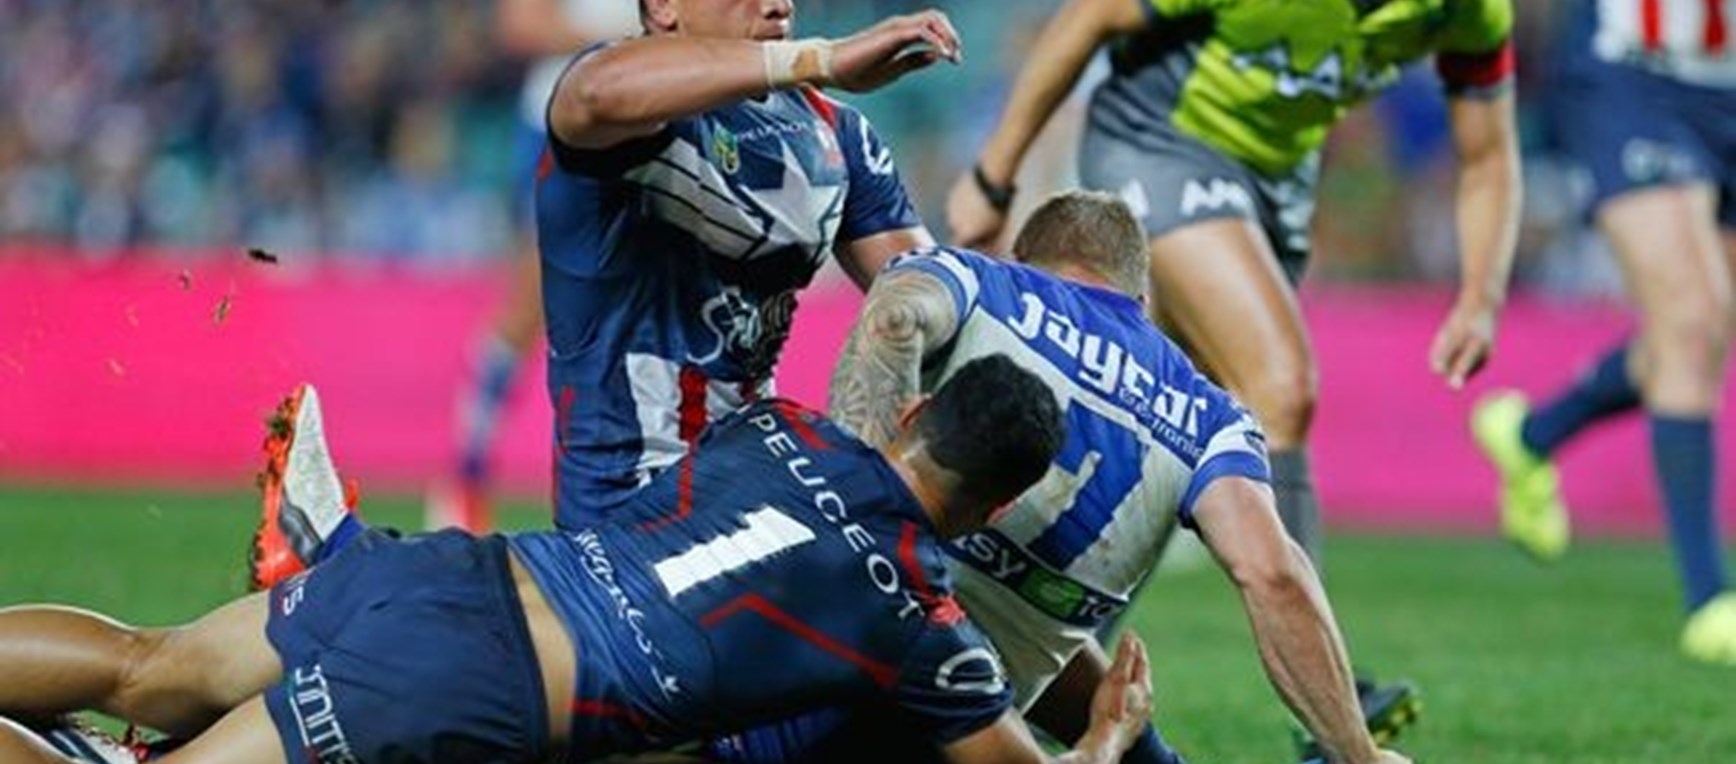 PHOTOS: NRL Round 21 v Roosters